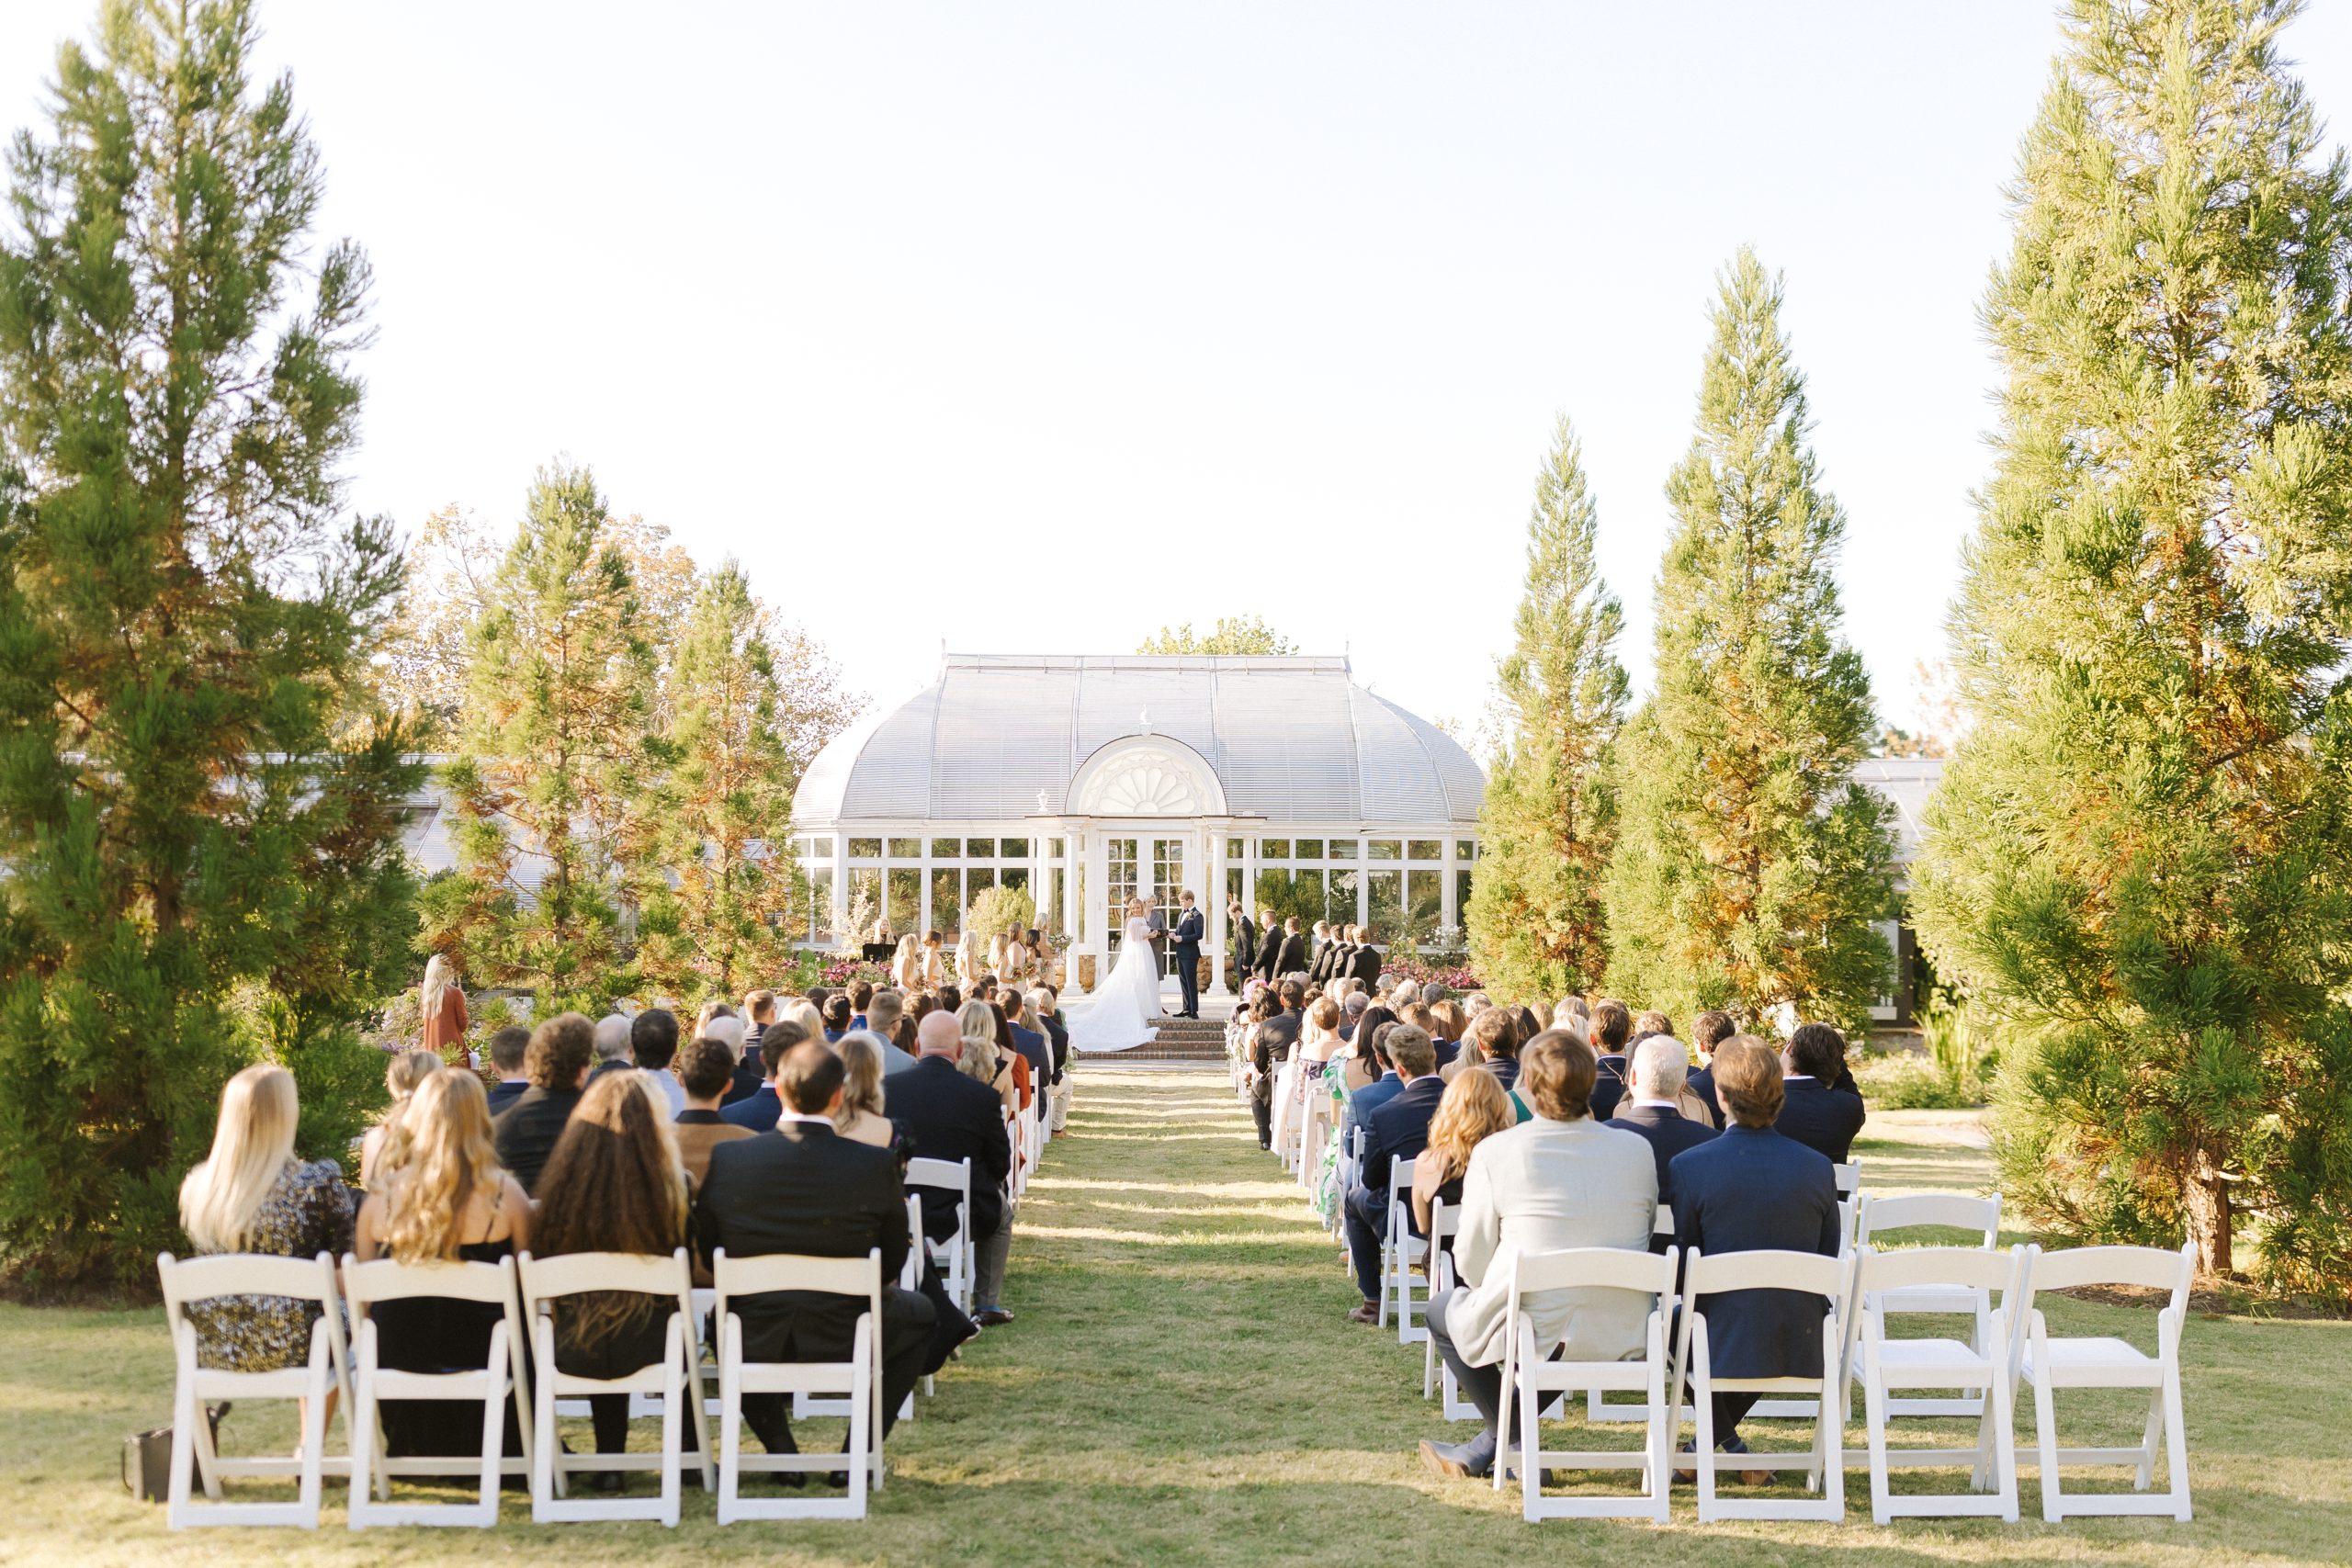 An early Fall Ceremony takes place in front of he greenhouse at Reynolda Gardens in Winston-Salem, NC